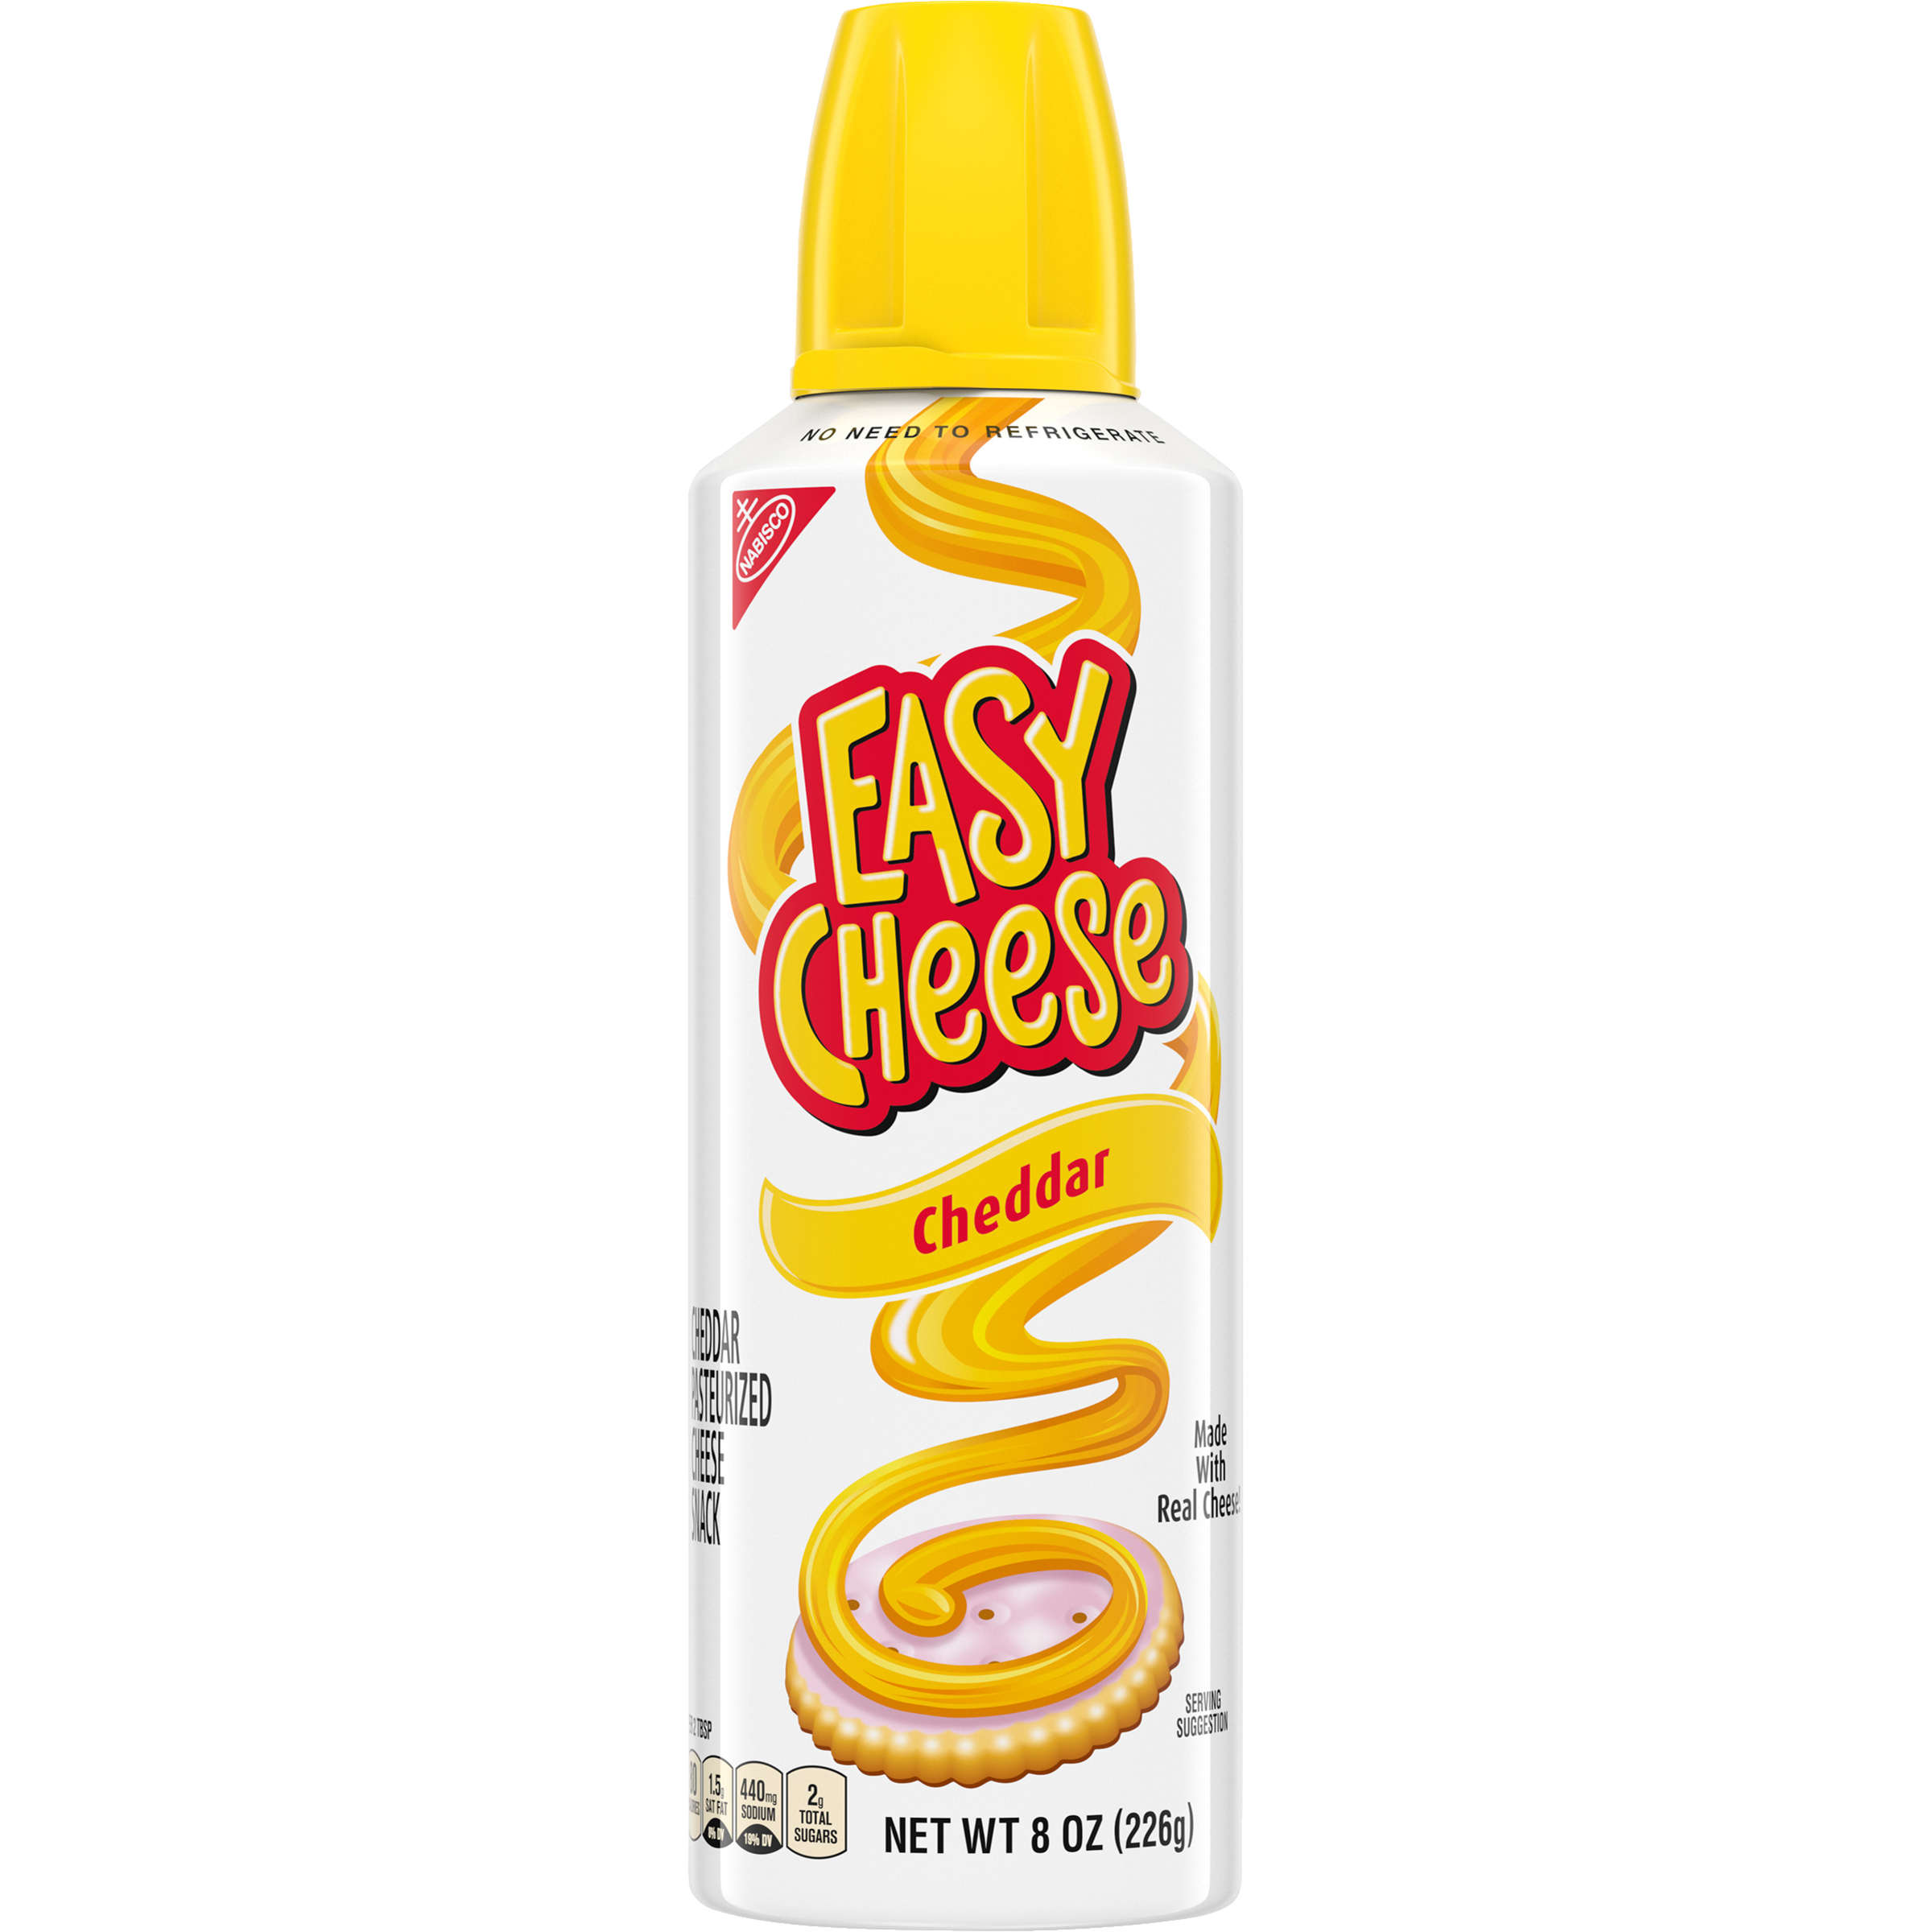 Easy Cheese Cheddar Cheese Snack, 8 oz-1